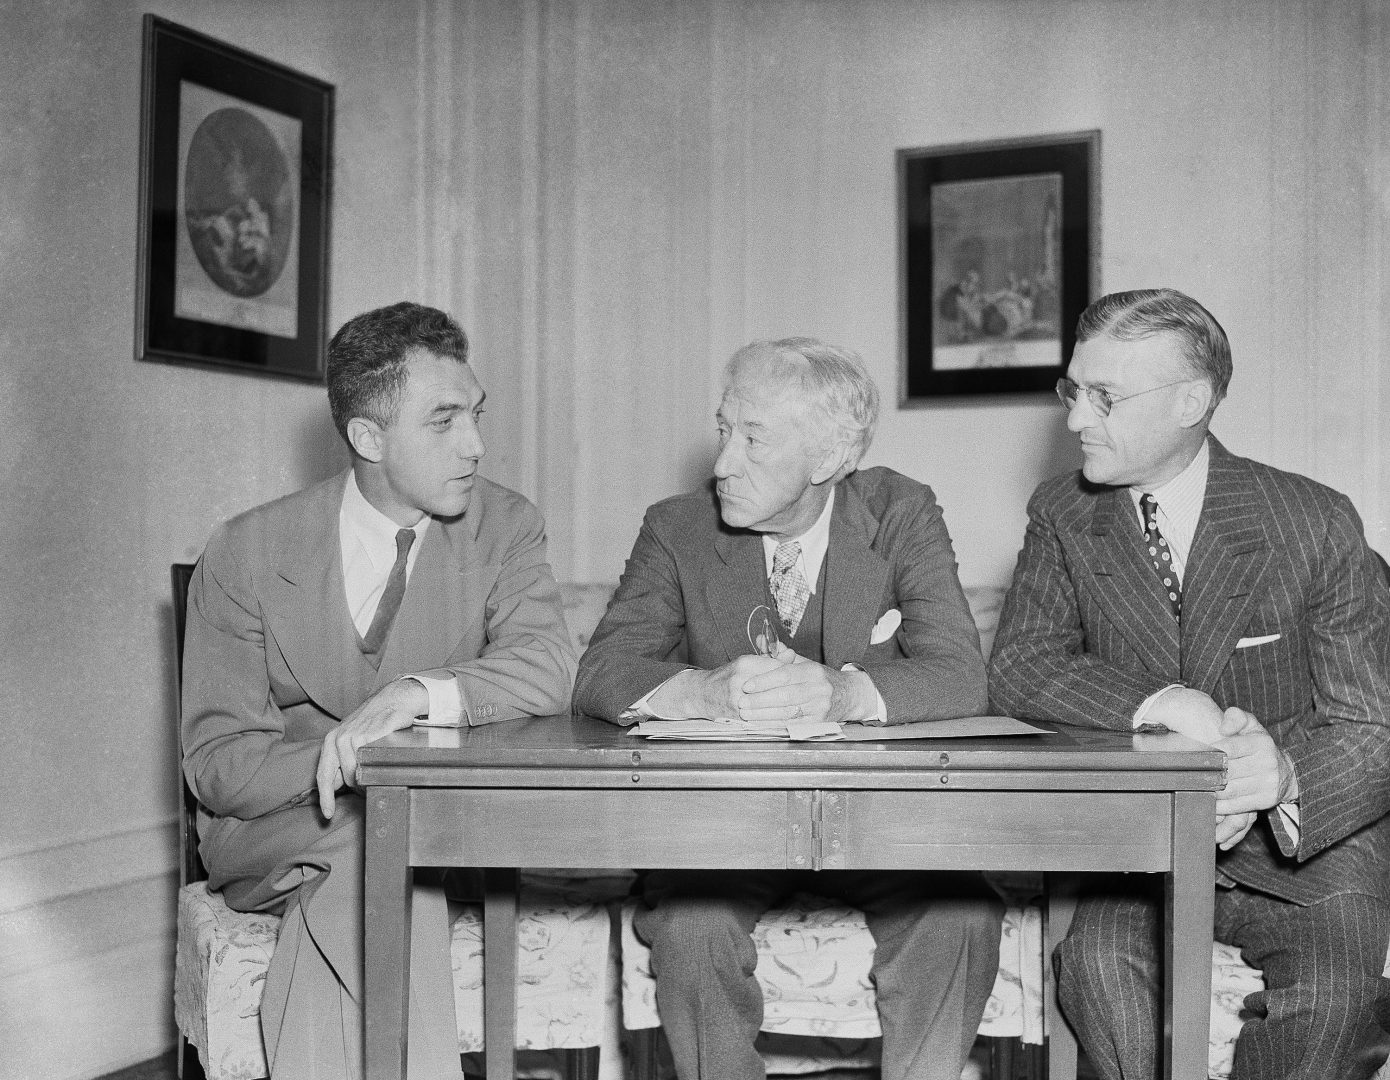 Here for the All Star Baseball Game, the Big Three of baseball confer on last minute details in Boston on July 6, 1936. Left to right: Ford Frick, President of the National League; Judge Kenesaw Mountain Landis, High Commissioner of Baseball; and William Harridge, President of the American League. 